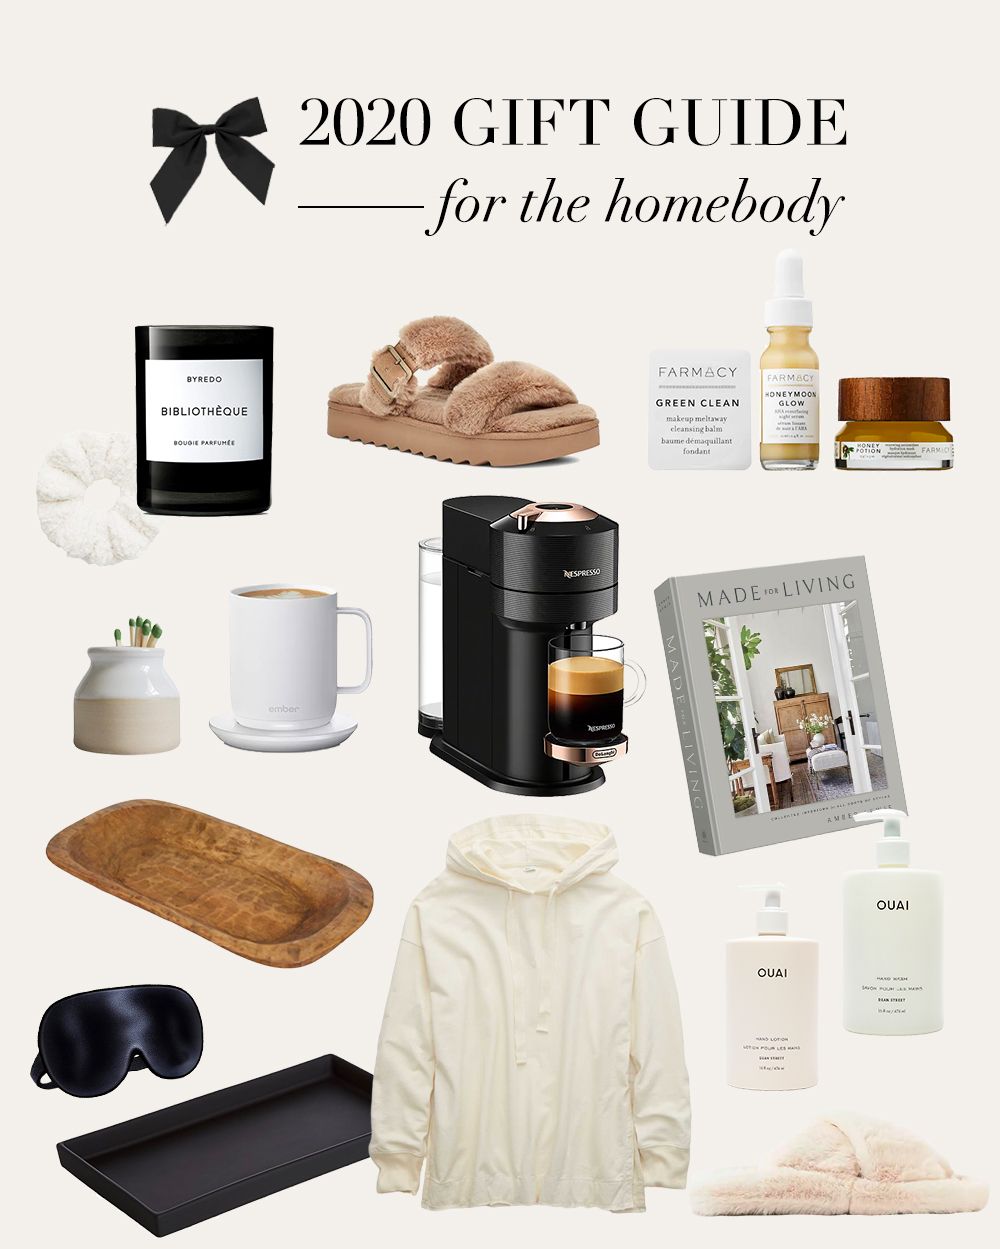 2020 Gift Guide For the Homebody